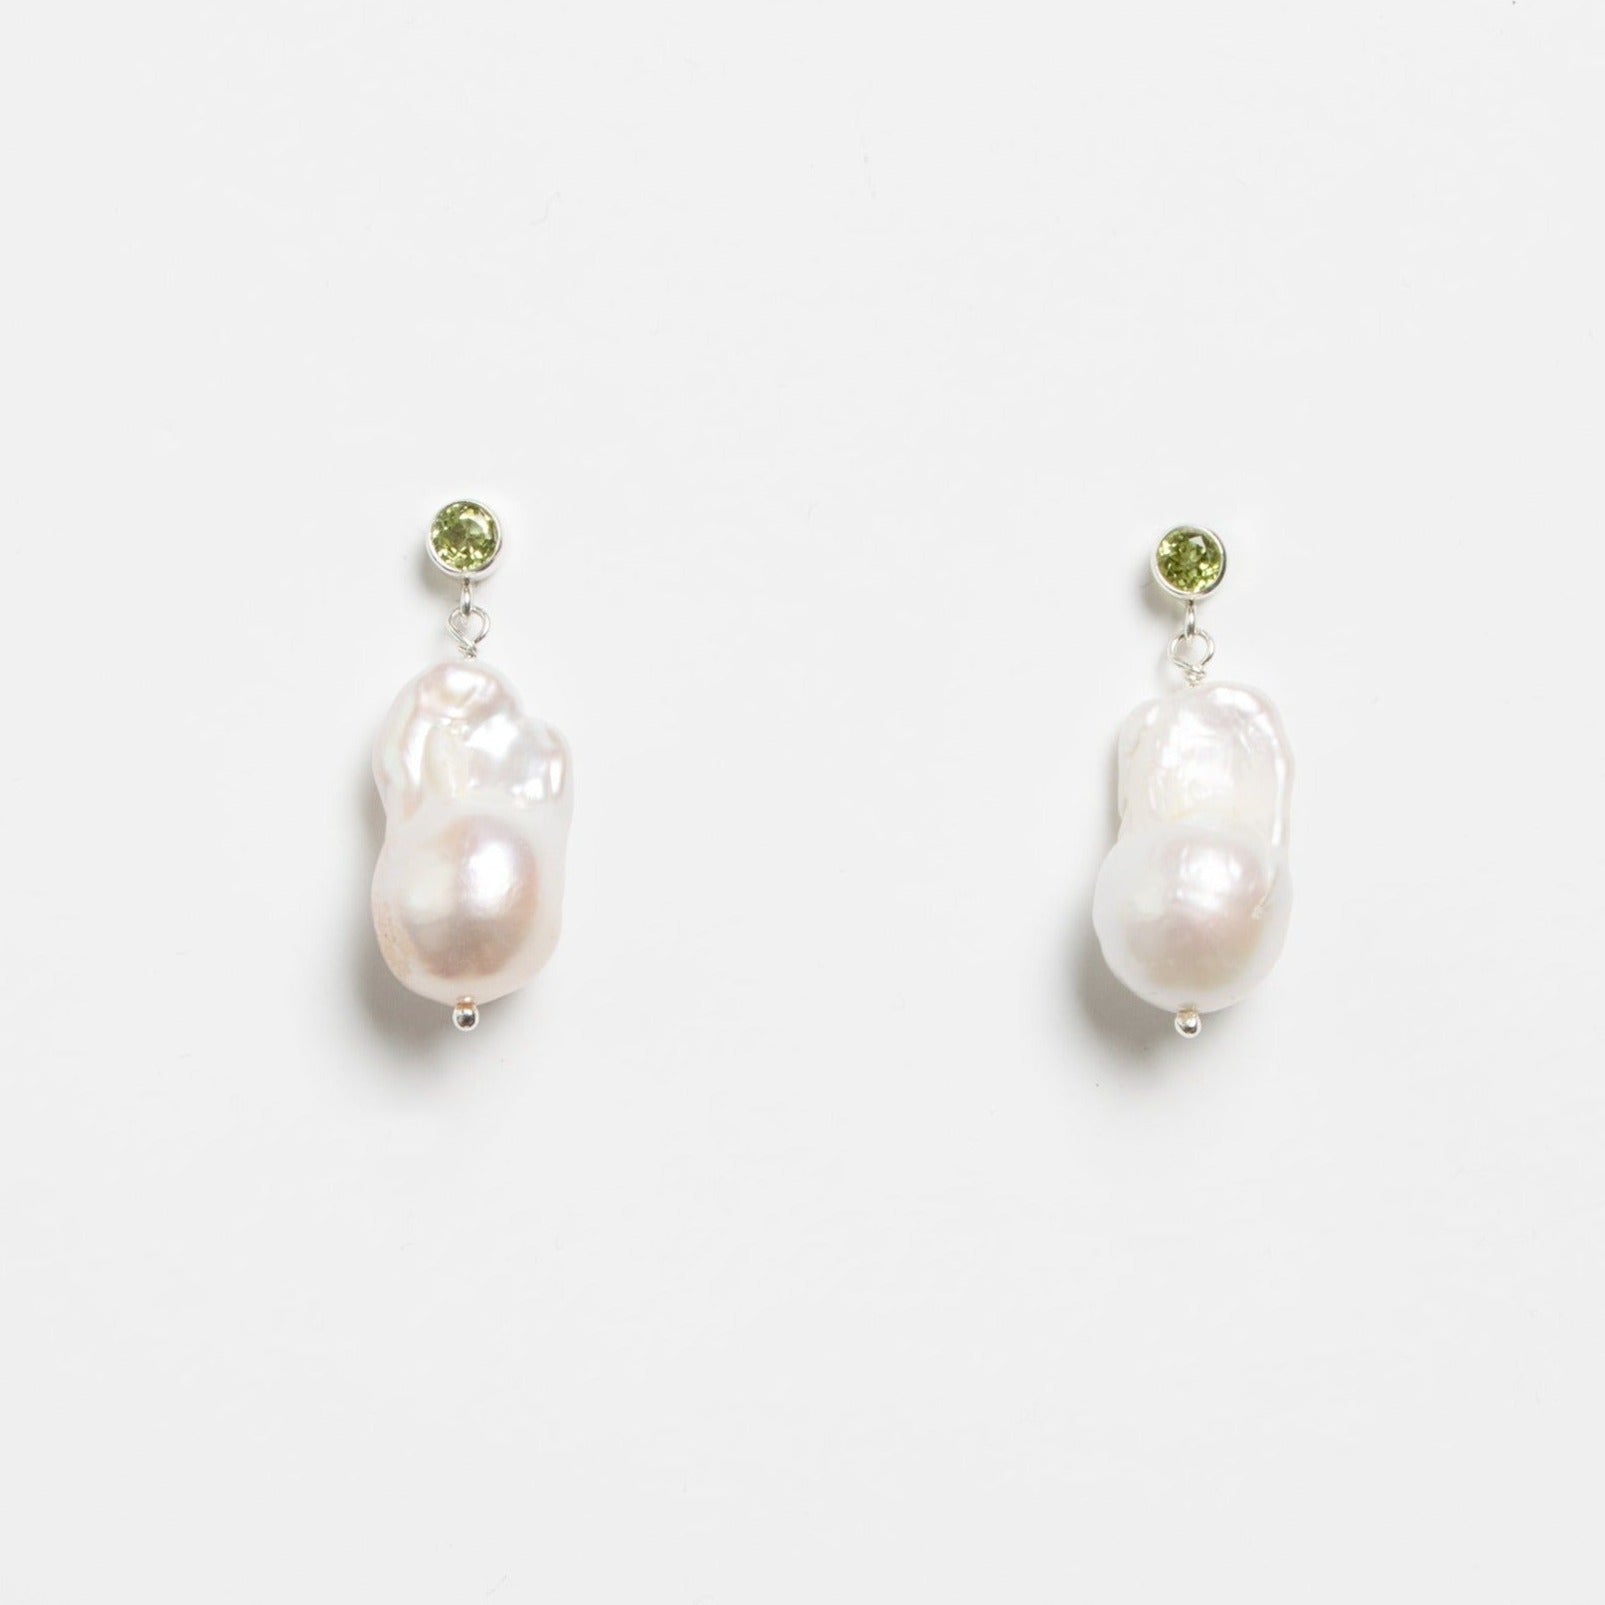 Lilly-of-the-Valley Earrings Silver